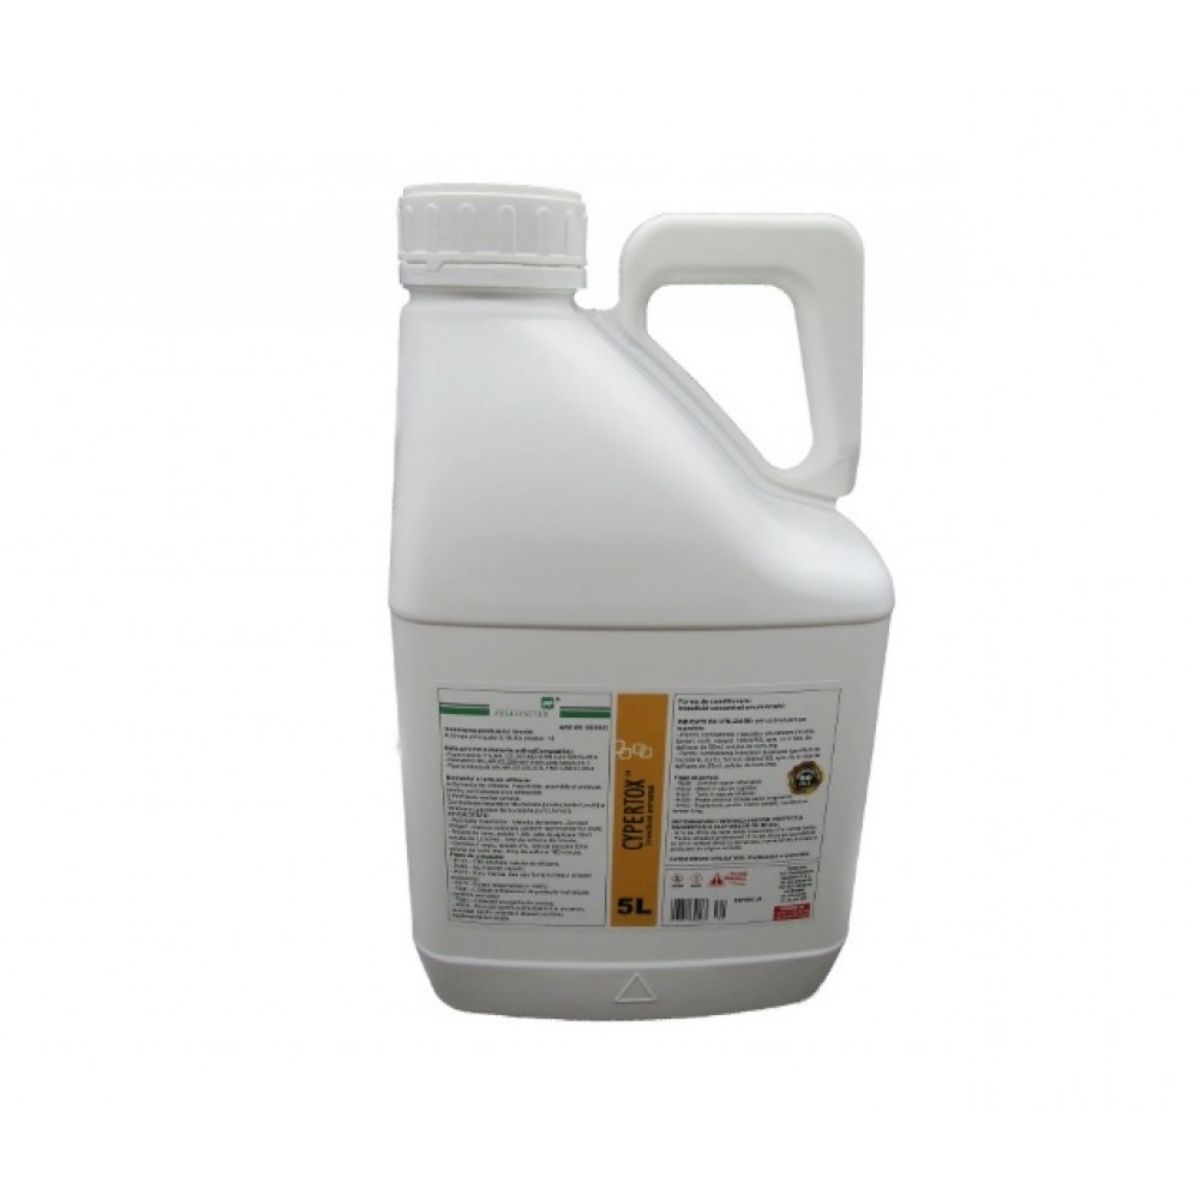 Insecticide - Insecticid concentrat CYPERTOX 5 L ,Pestmaster, hectarul.ro